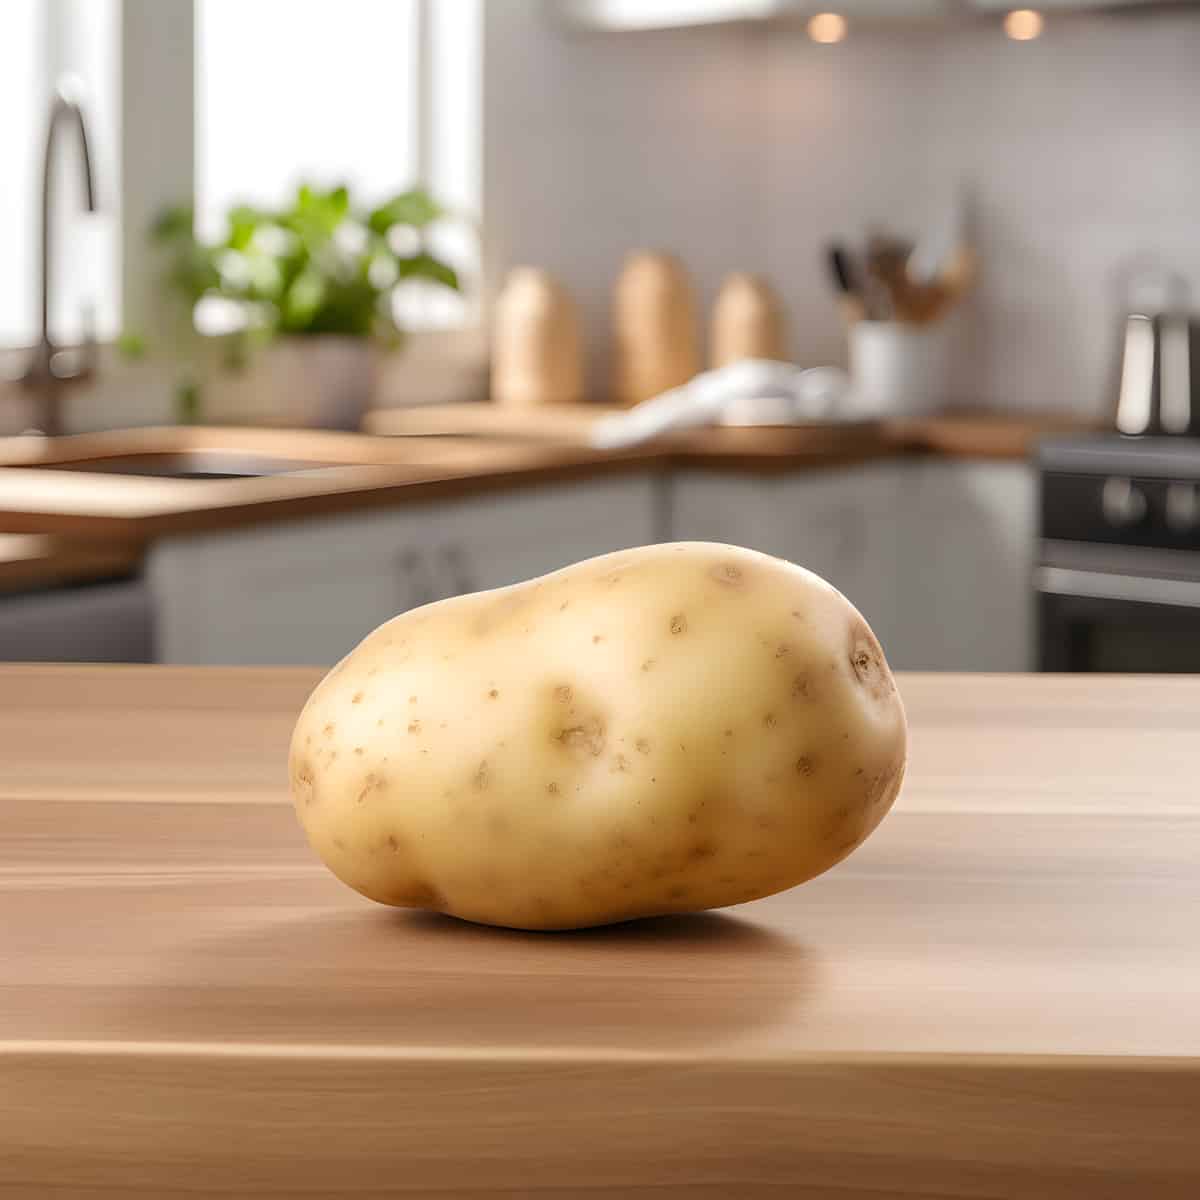 Innovator Potatoes on a kitchen counter